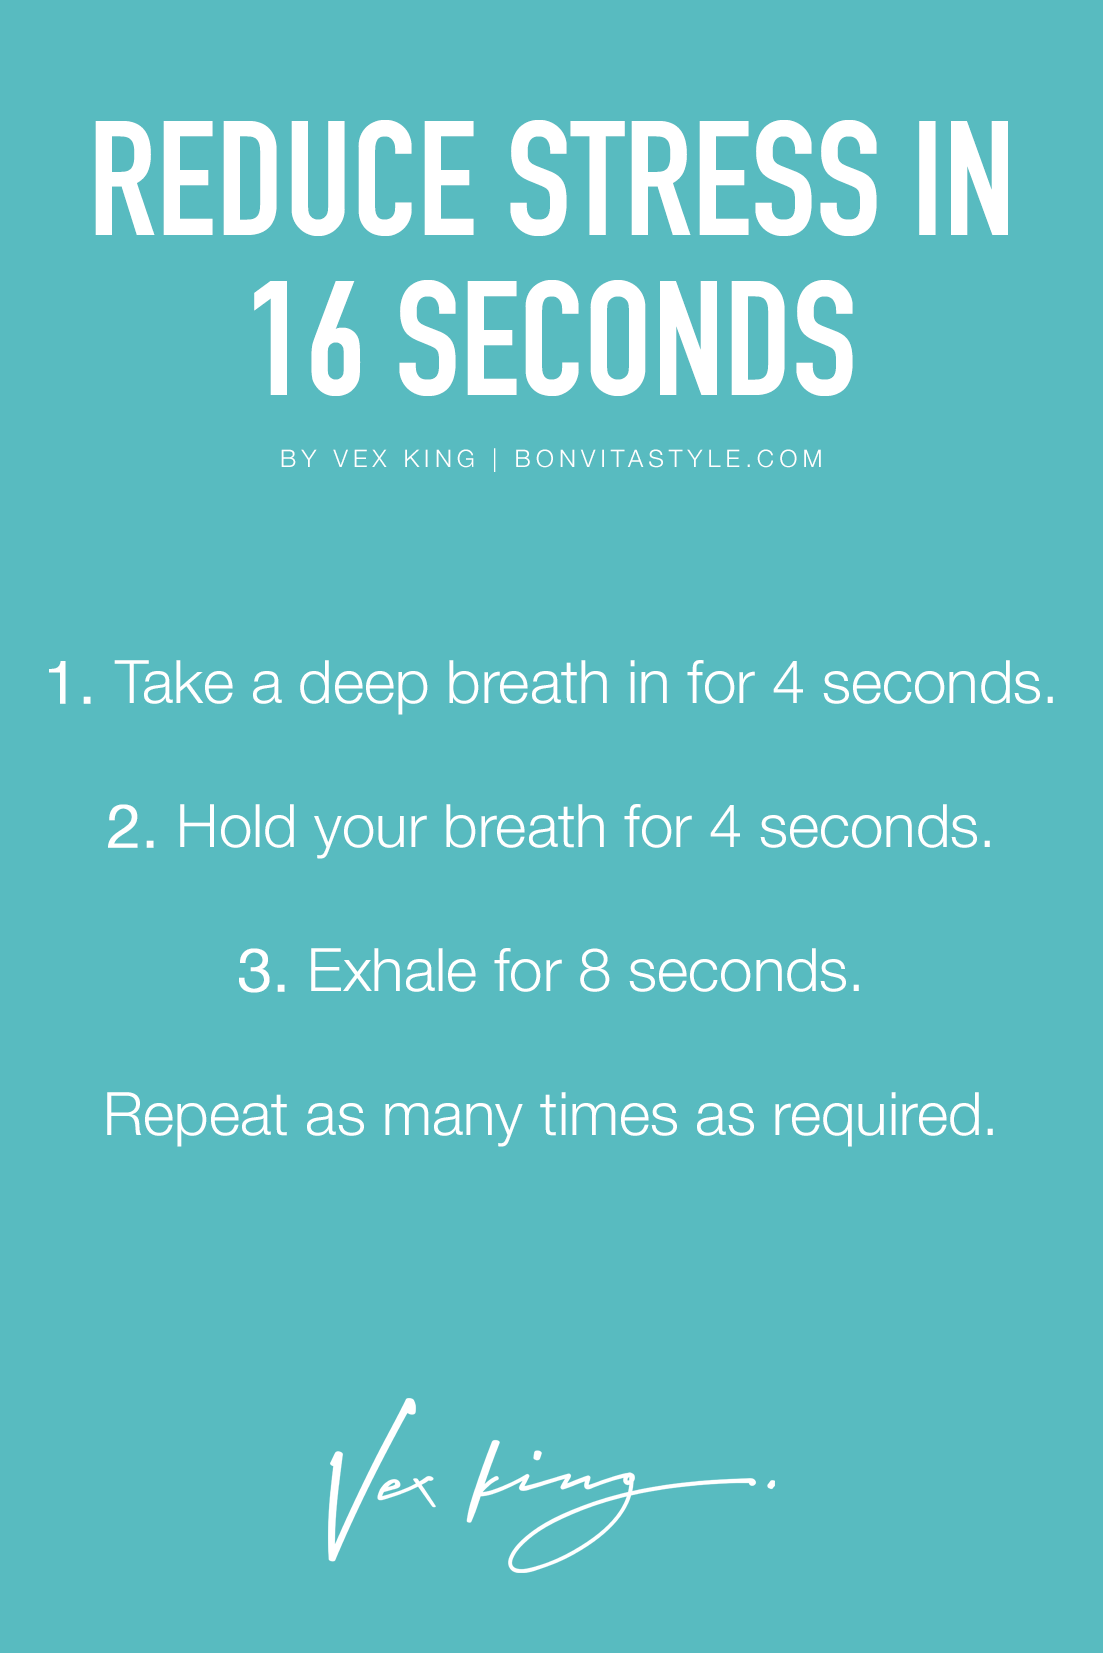 A Trick To Reduce Stress In Only 16 Seconds! Works Great For ...